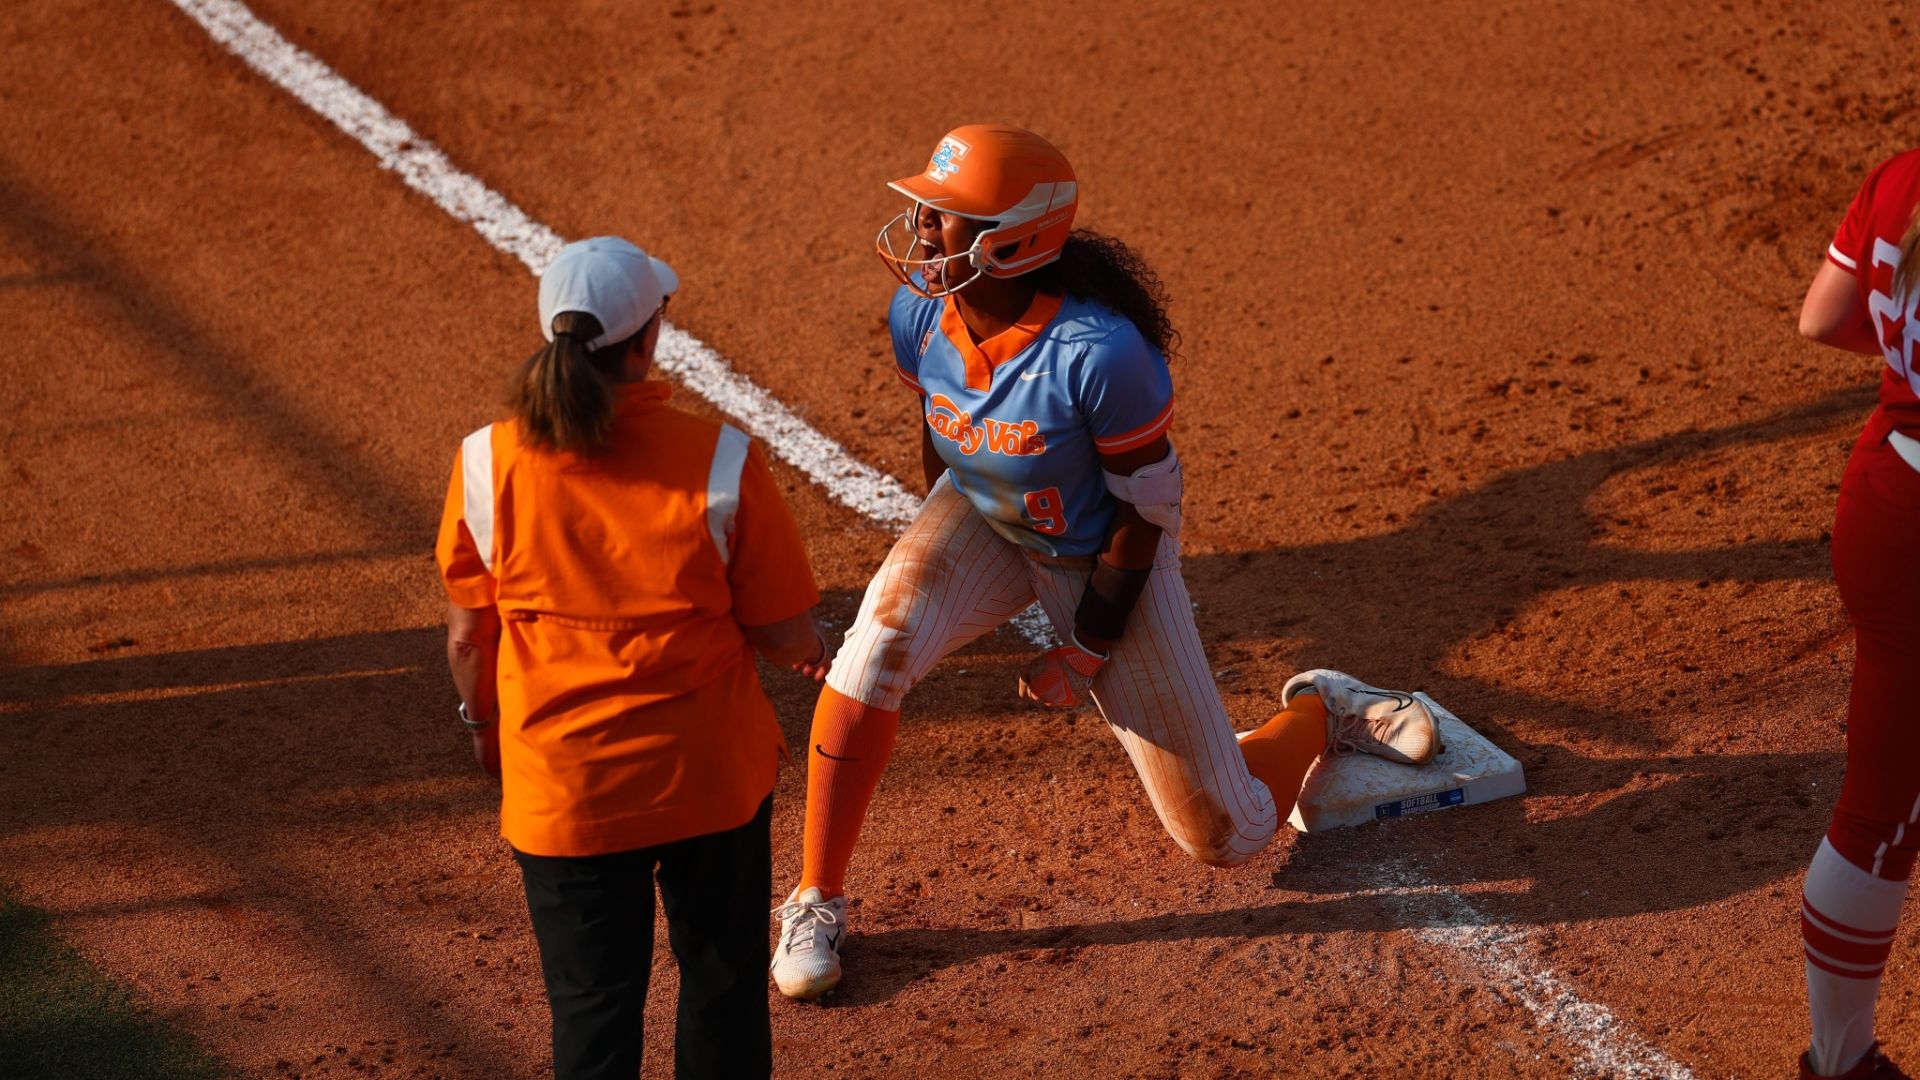 Lady Vols sweep Regional, punch ticket to Supers